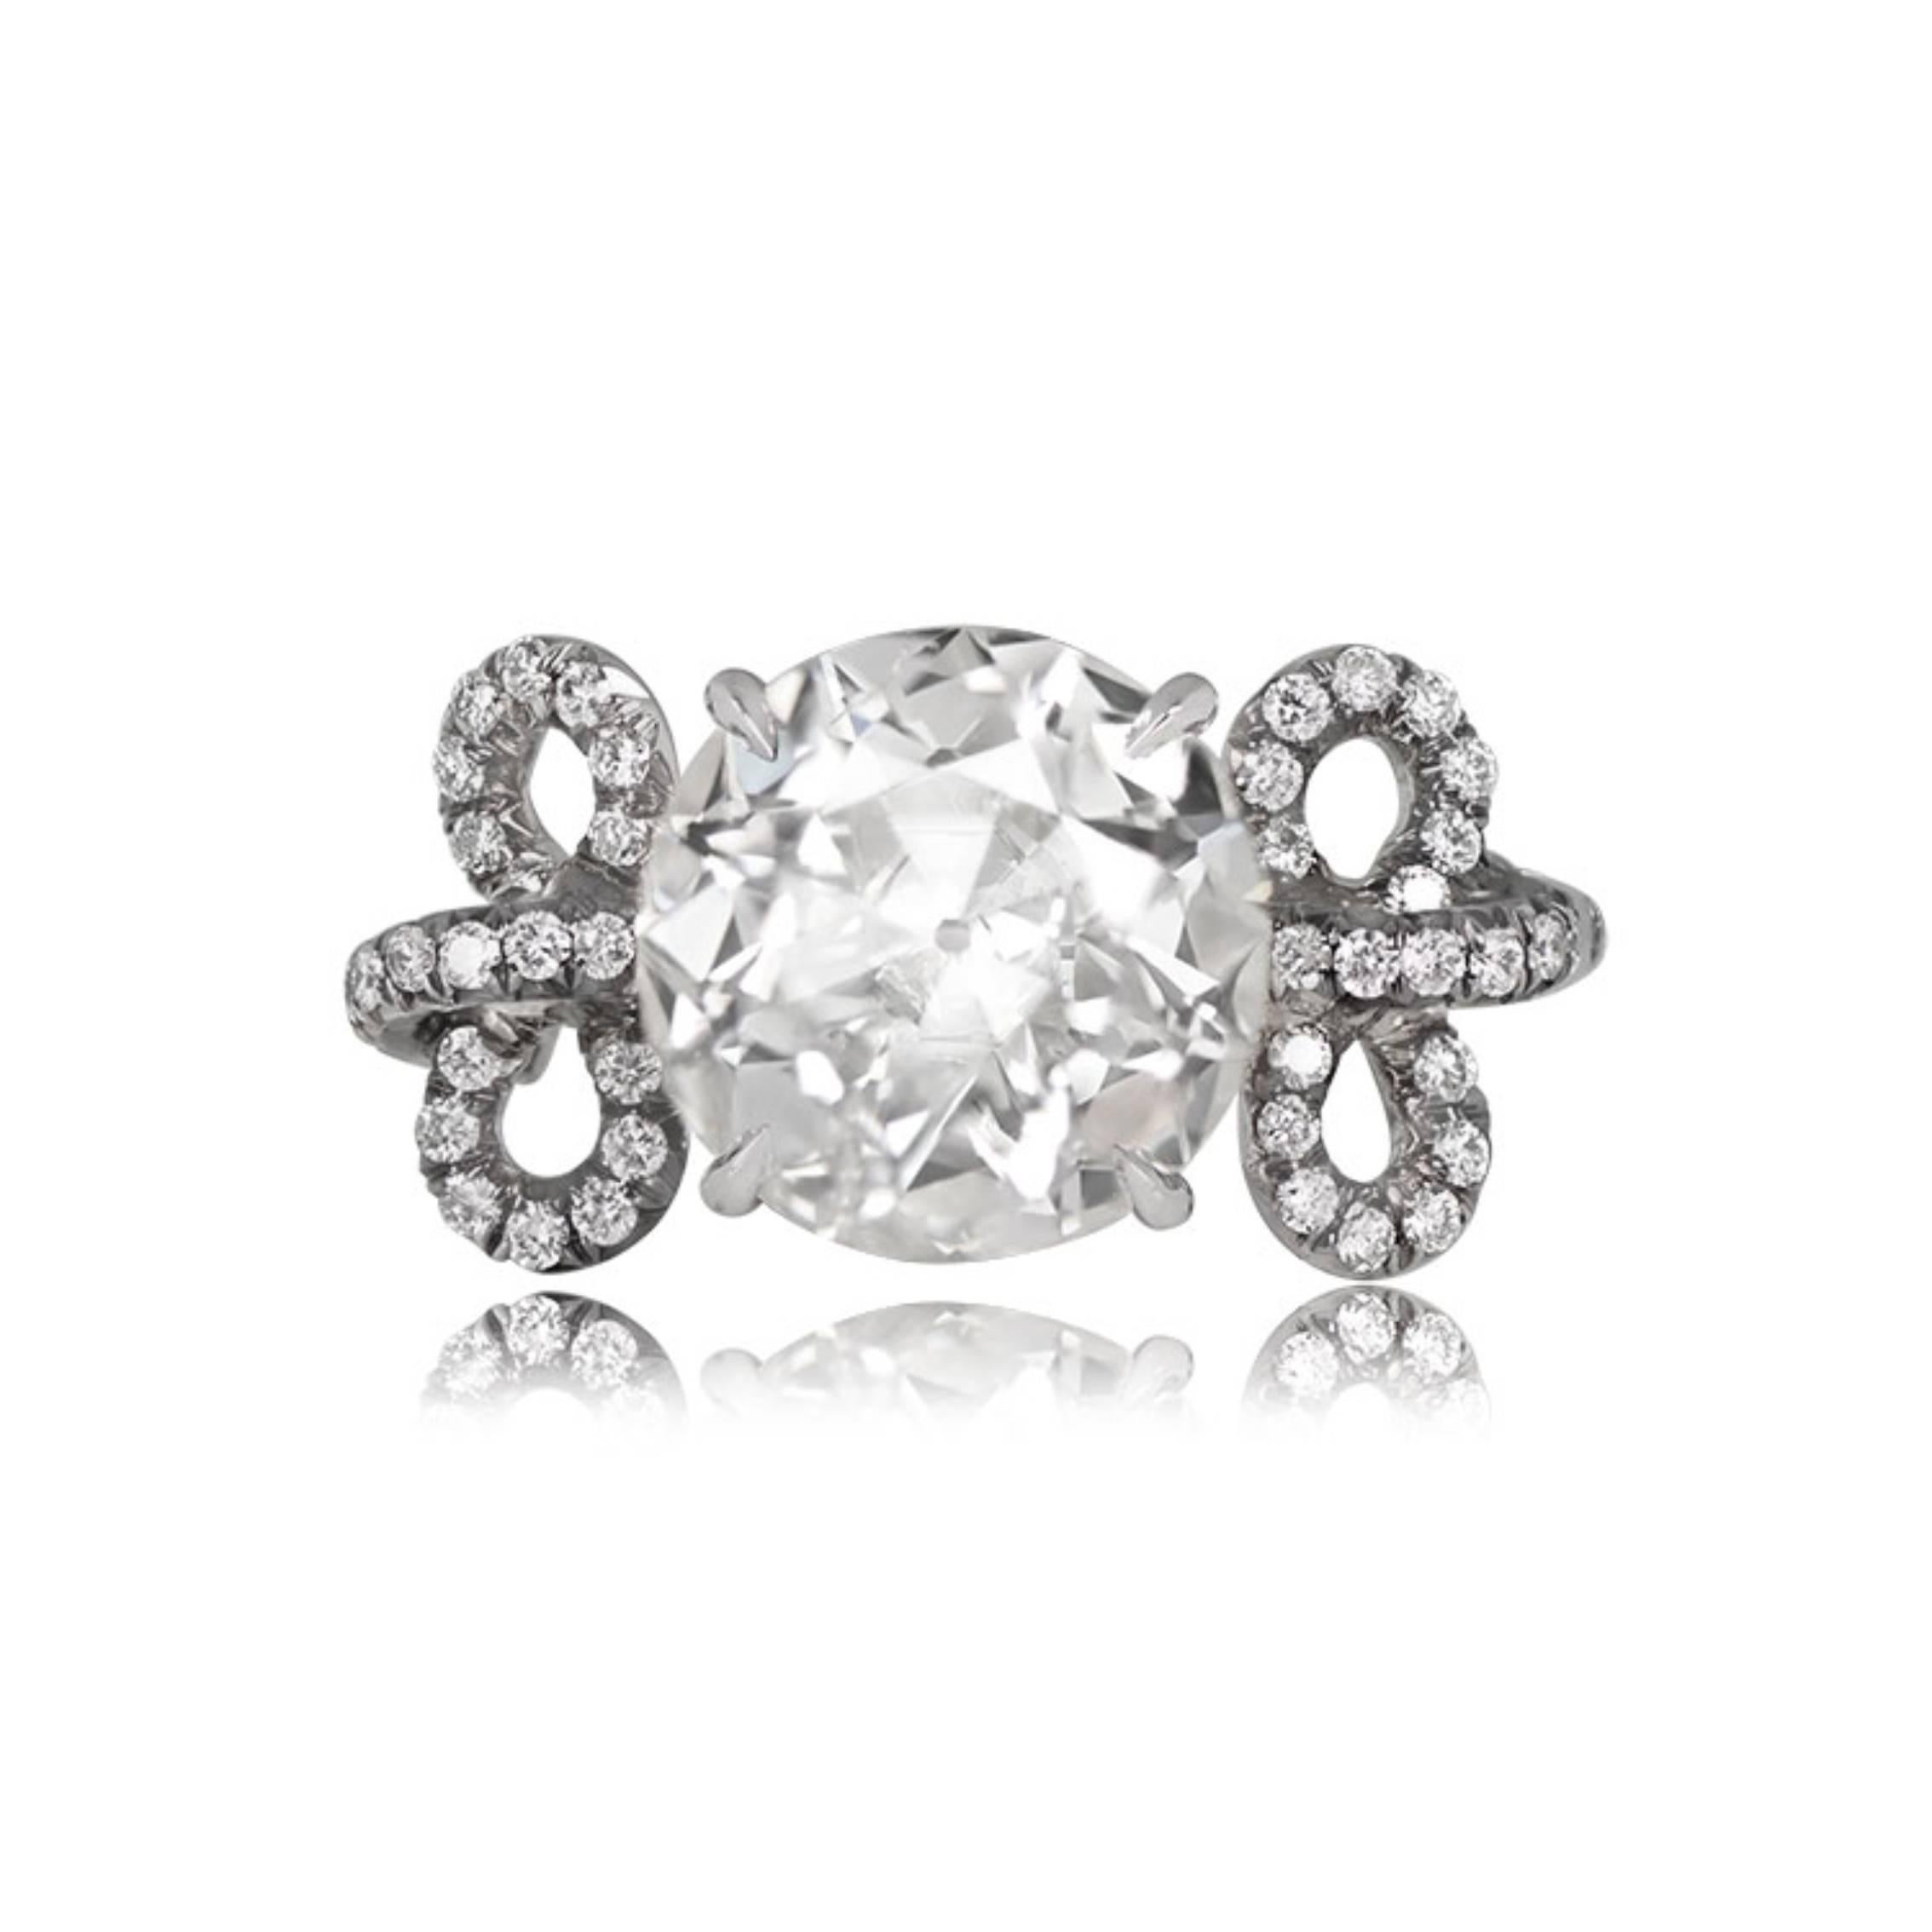 This platinum ring showcases a striking GIA-certified 3.43-carat old European cut diamond with I color and SI2 clarity, prong-set. The shoulders are adorned with smaller round brilliant diamonds in a micro-pave setting in a bow motif.


Ring Size: